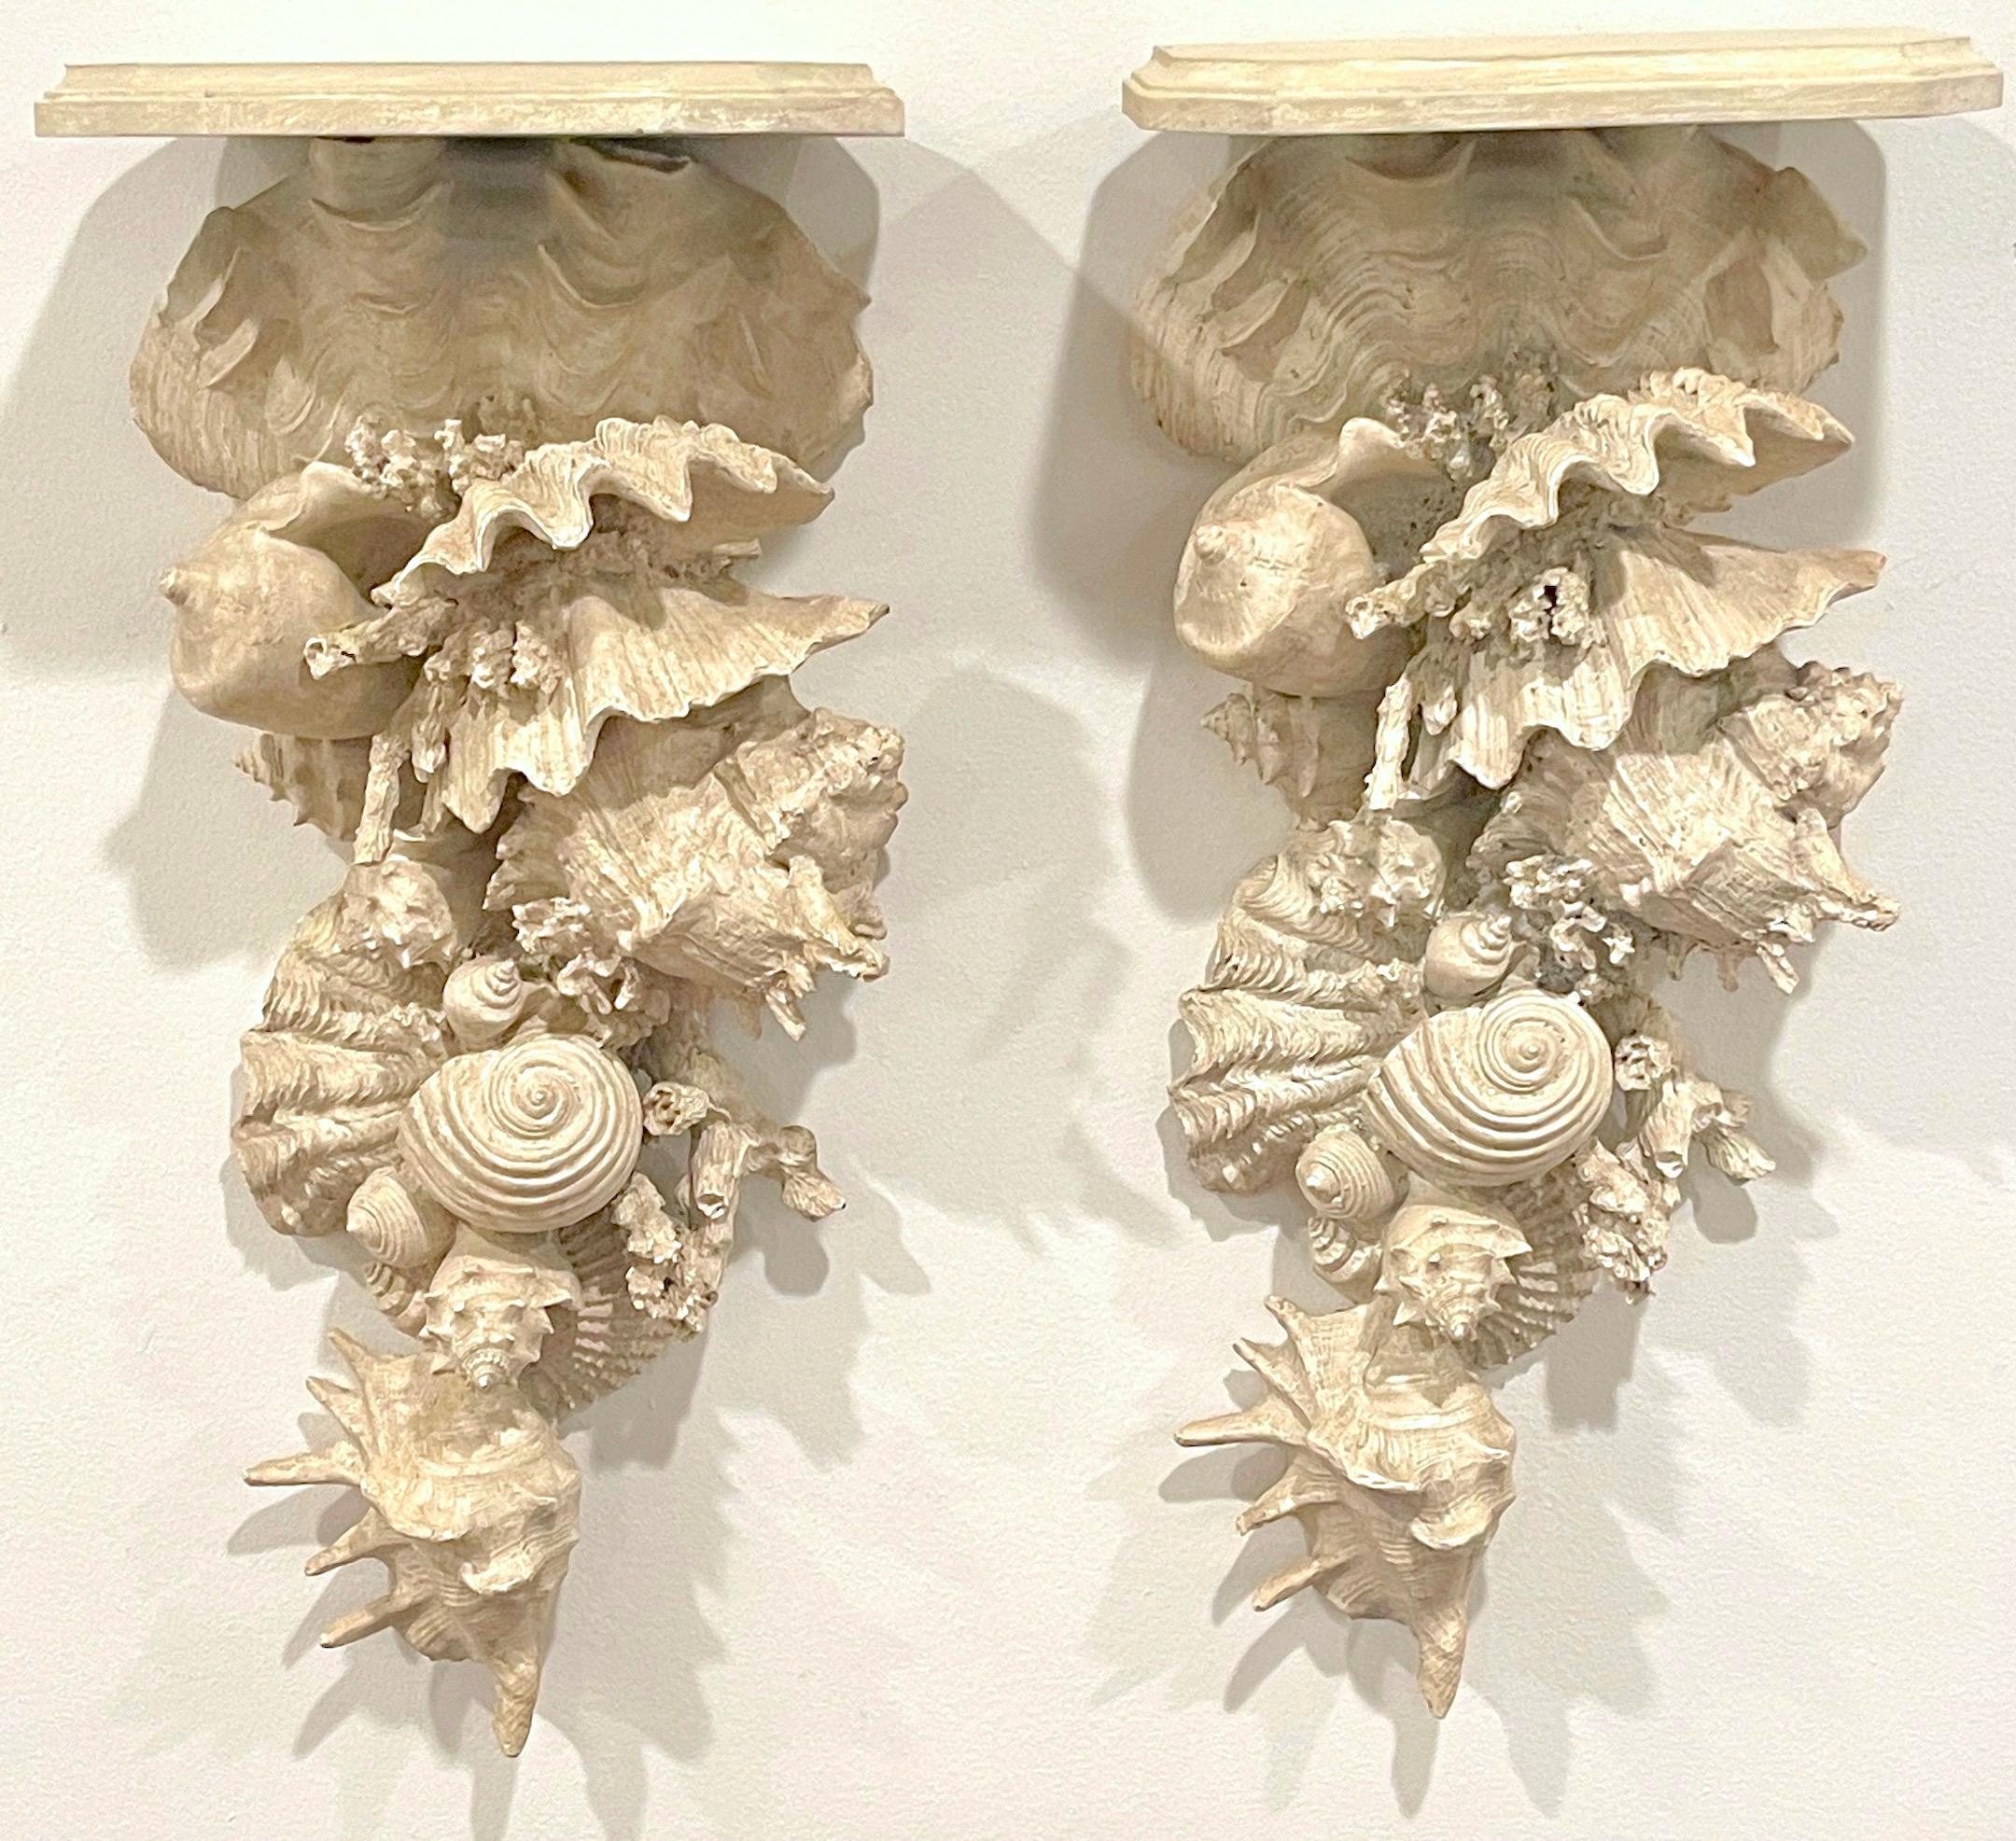 Pair of Tall 'Narragansett' Shell & Coral Motif  Wall Brackets 
Later 20th Century 
Enhance your wall decor with this charming Pair of Tall 'Narragansett' Shell & Coral Motif Wall Brackets, made in the later 20th century. These brackets combine